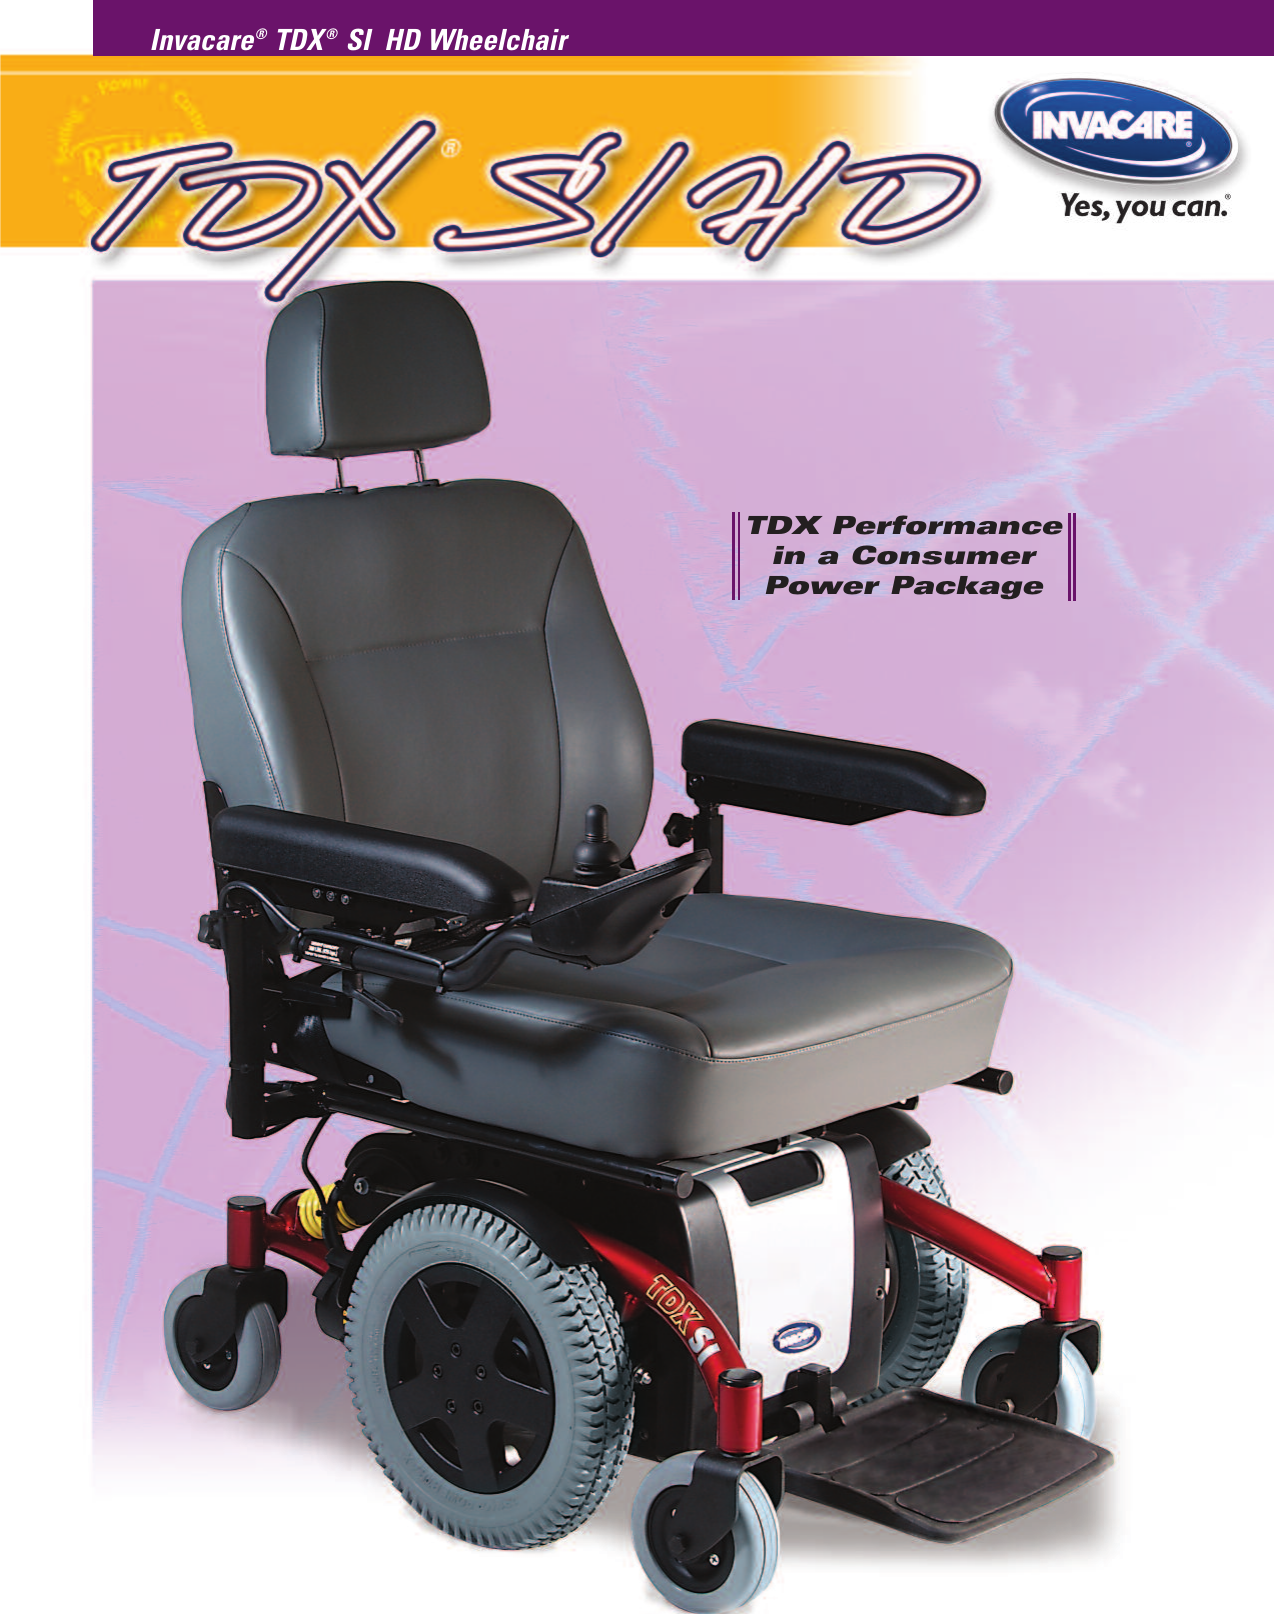 Page 1 of 4 - Invacare Invacare-Tdx-Si-Hd-Users-Manual- 08-060  Invacare-tdx-si-hd-users-manual